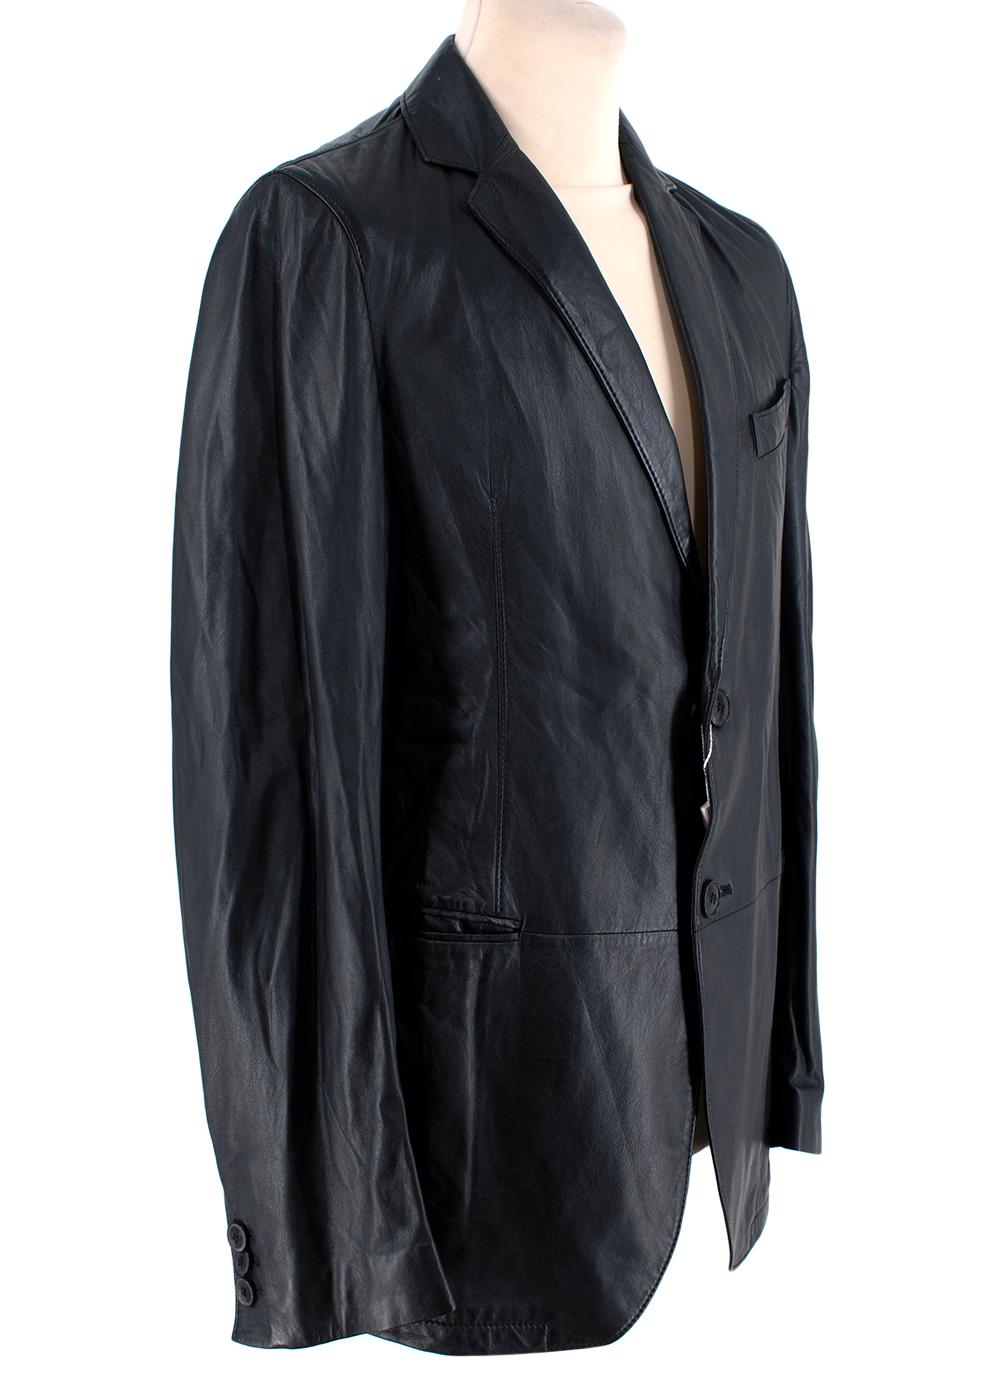 Armani Collezioni Black Nappa Lambskin Lightweight Jacket 

-Soft leather jacket featuring three inset pockets.
-Buttoned closure and cuffs 
-Nylon lining 

Measurements:
43cm sleeve length 
43cm chest 
48cm waist 
53cm hip
67cm sleeve length
81cm